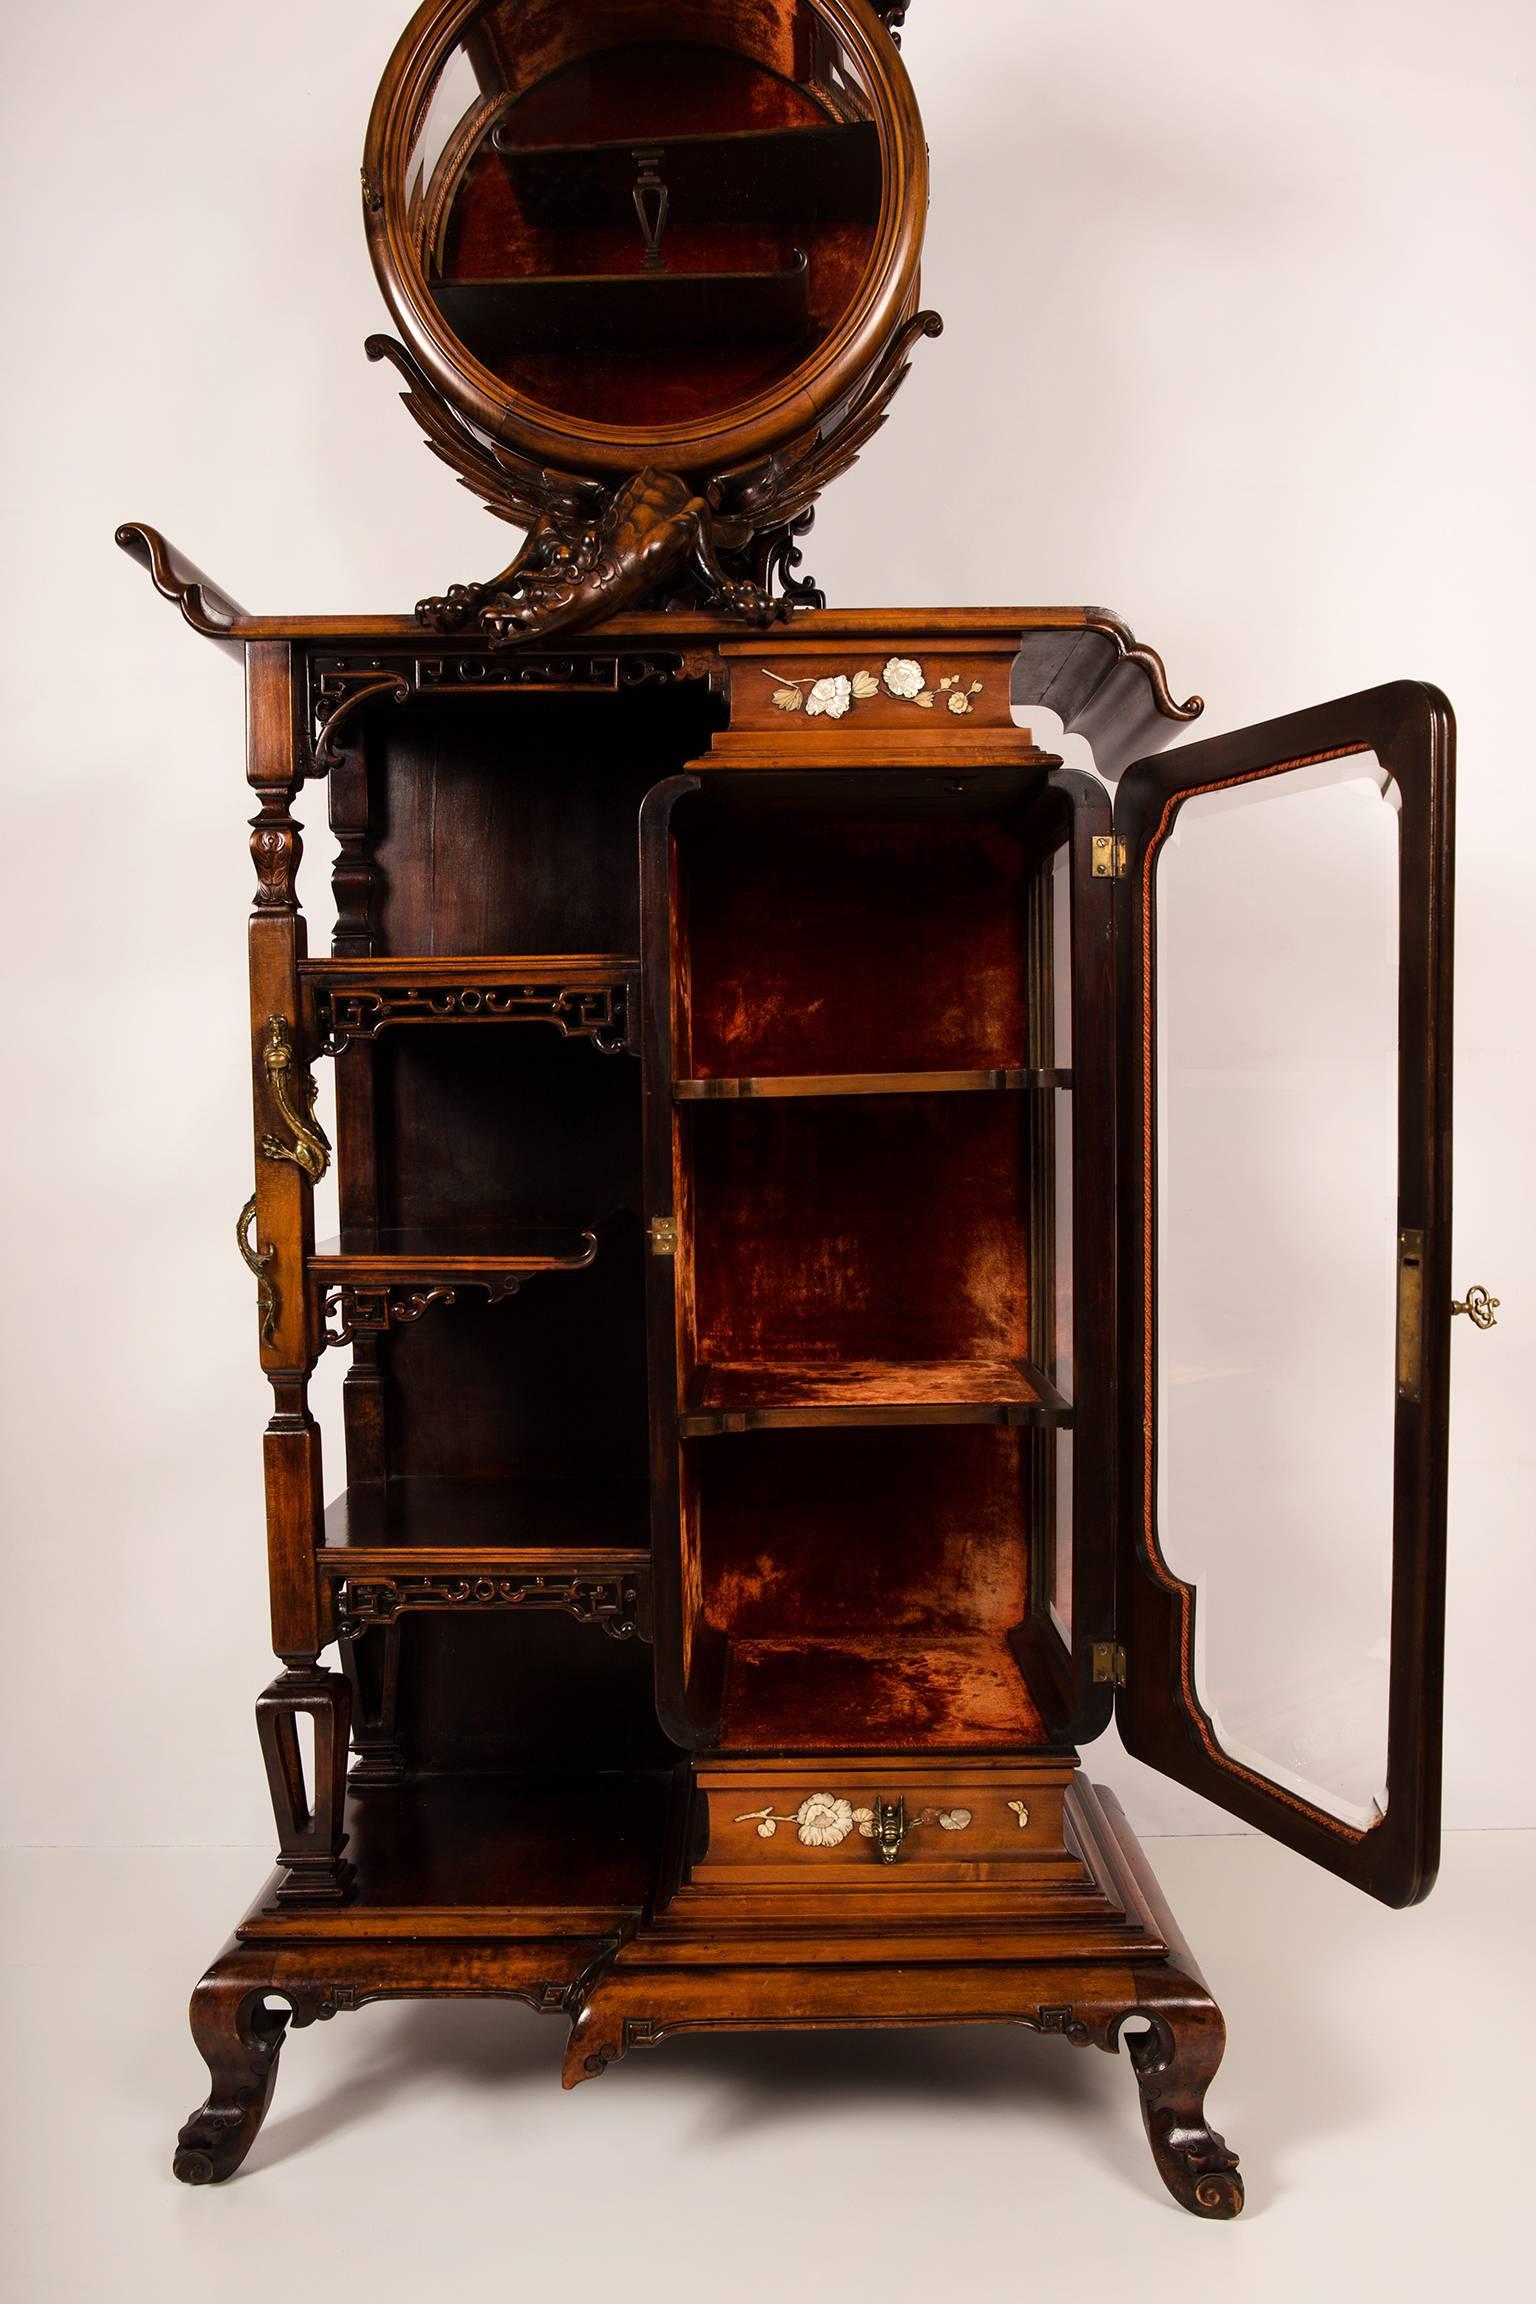 An interesting and rare example of chinoiserie or Japonisme, this collectors vitrine with etagere can be dated circa 1890. Based on the use of similar forms, French 19th century applied arts specialist Mrs. Daisy Maison attributes this piece of